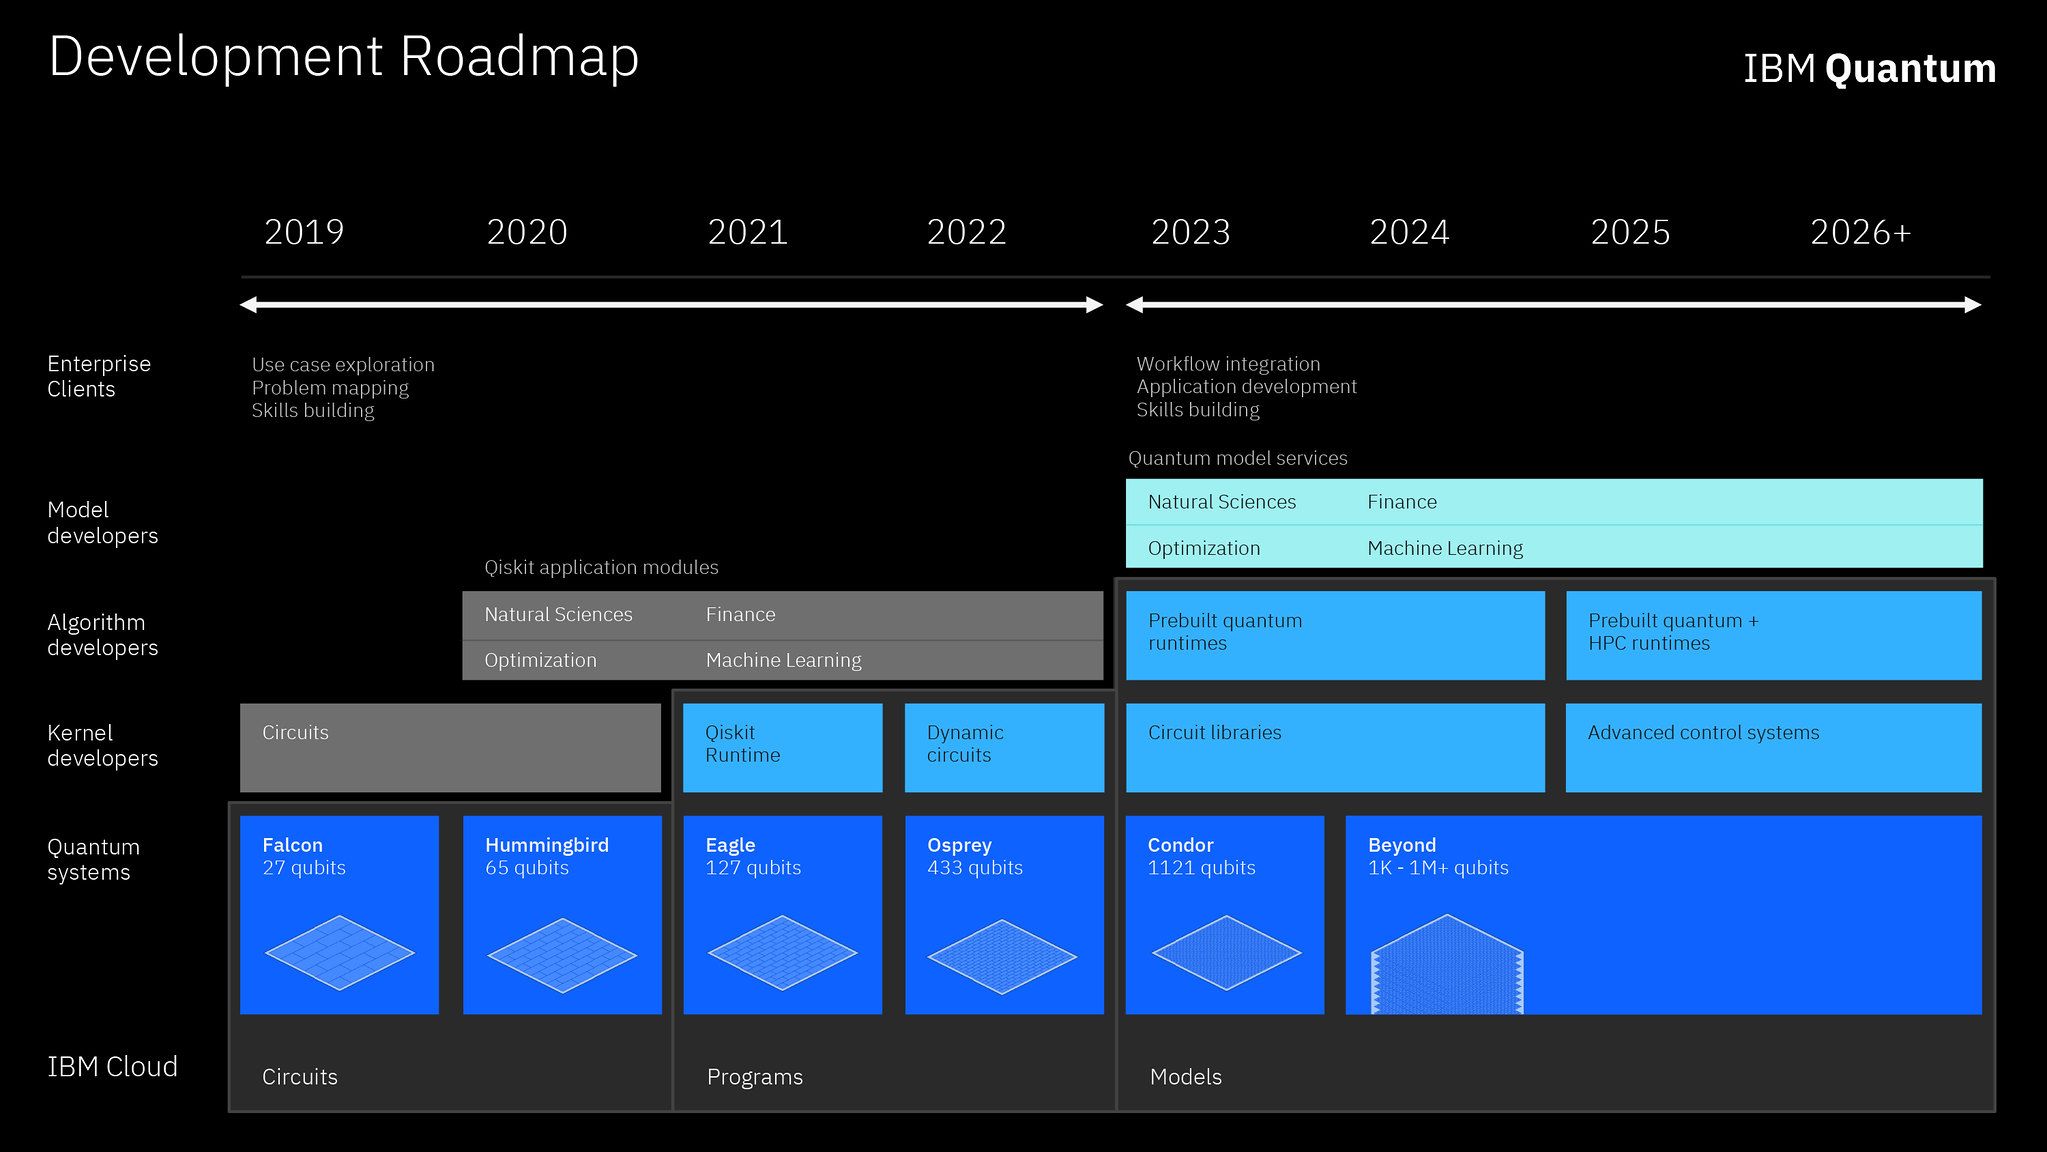 Graphic of IBM’s roadmap for building an open quantum software ecosystem